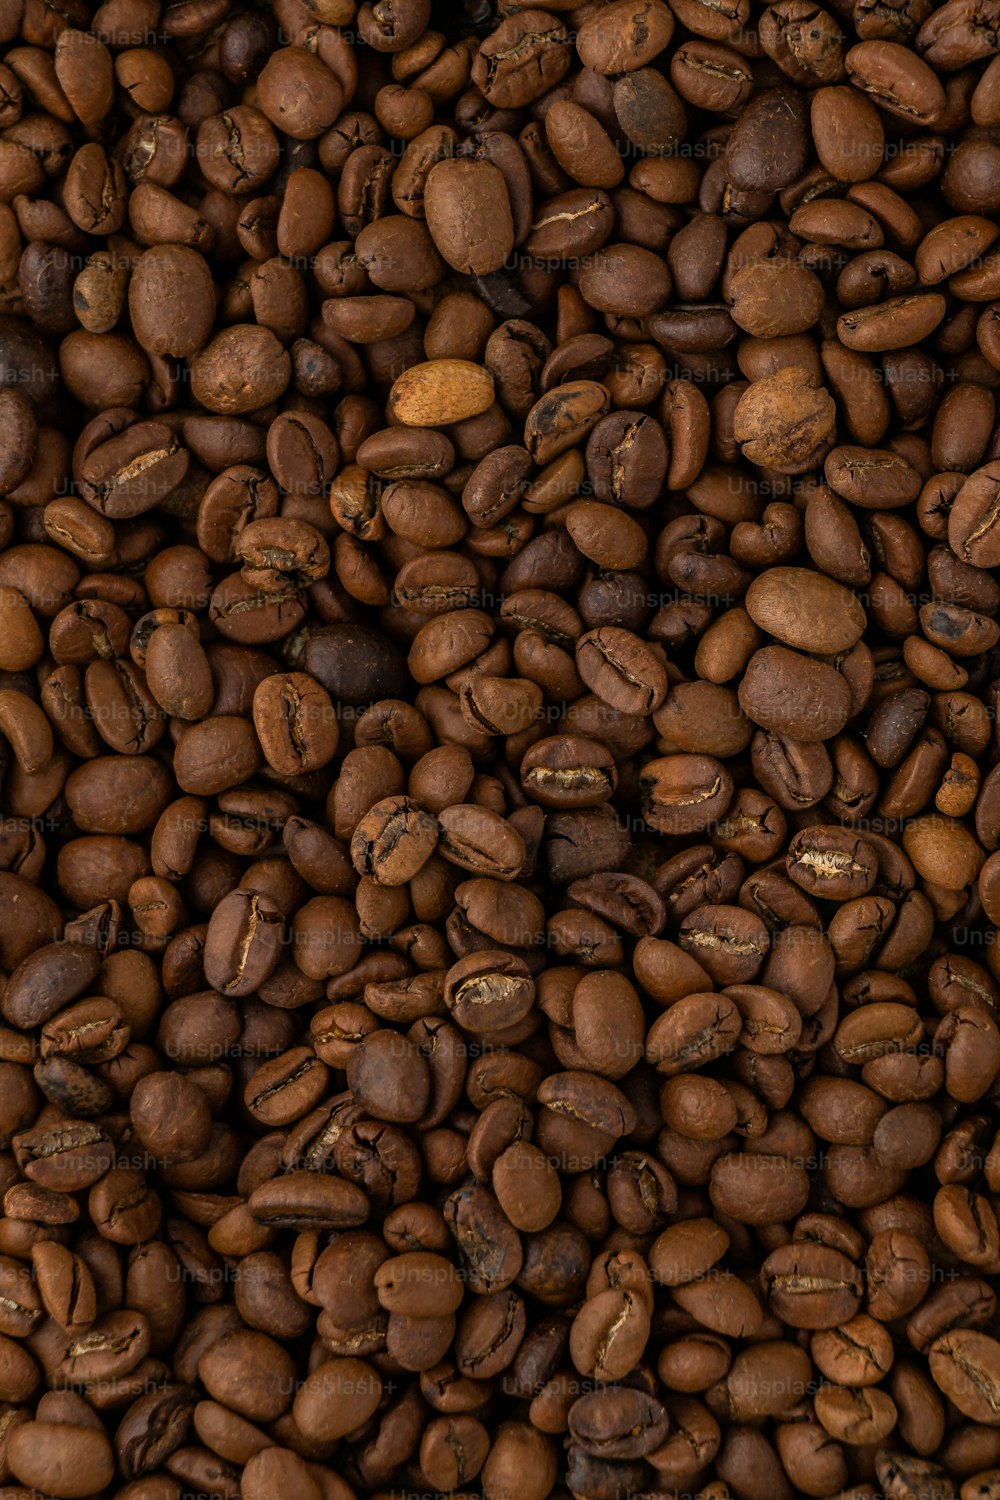 a large pile of coffee beans is shown